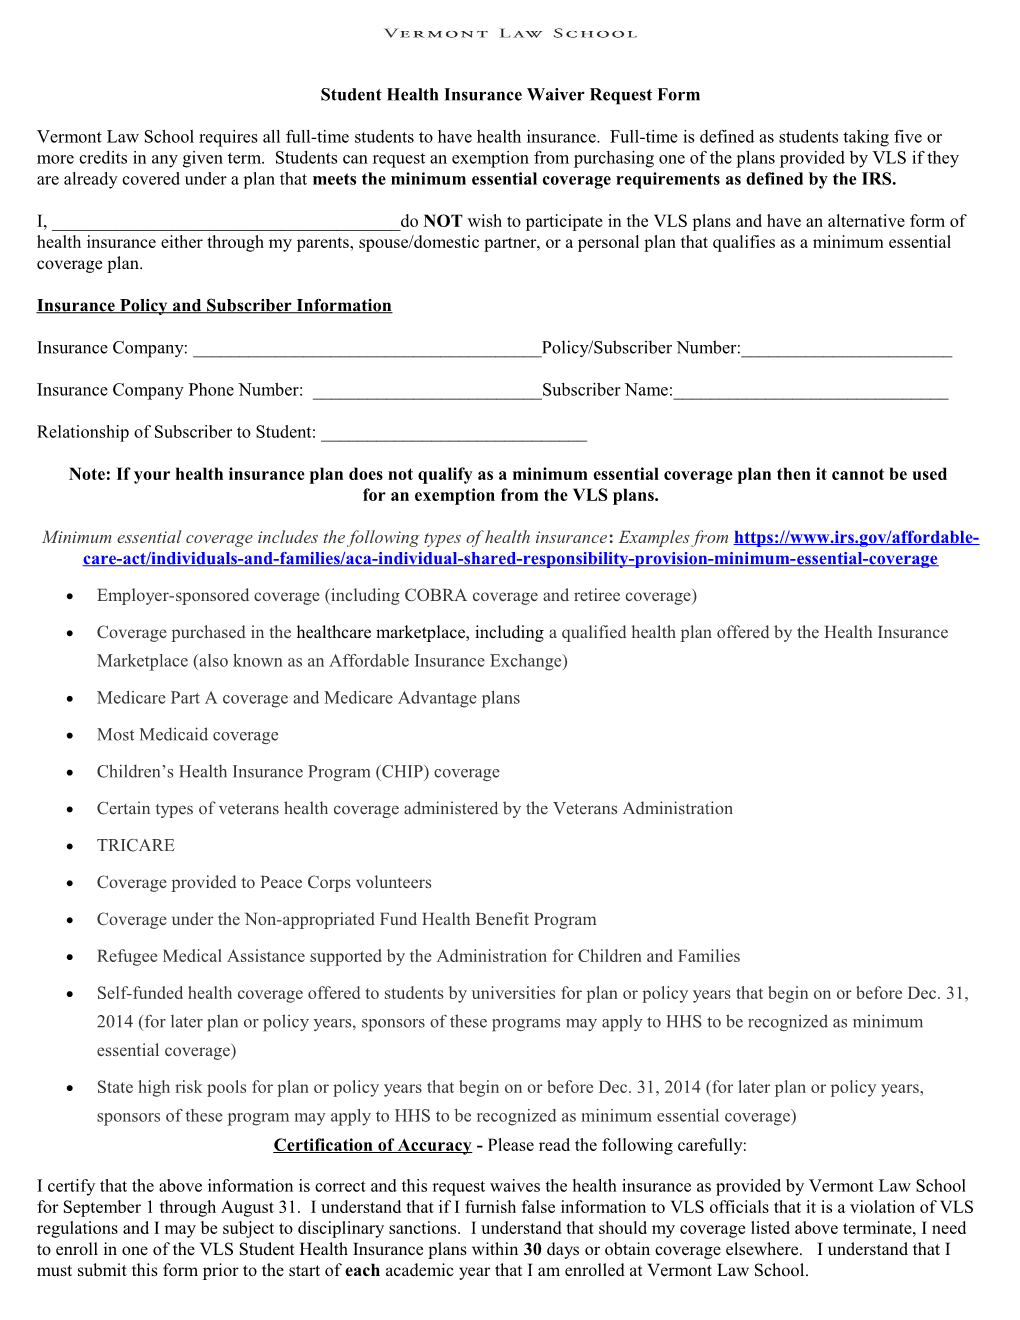 Student Health Insurance Waiver Request Form